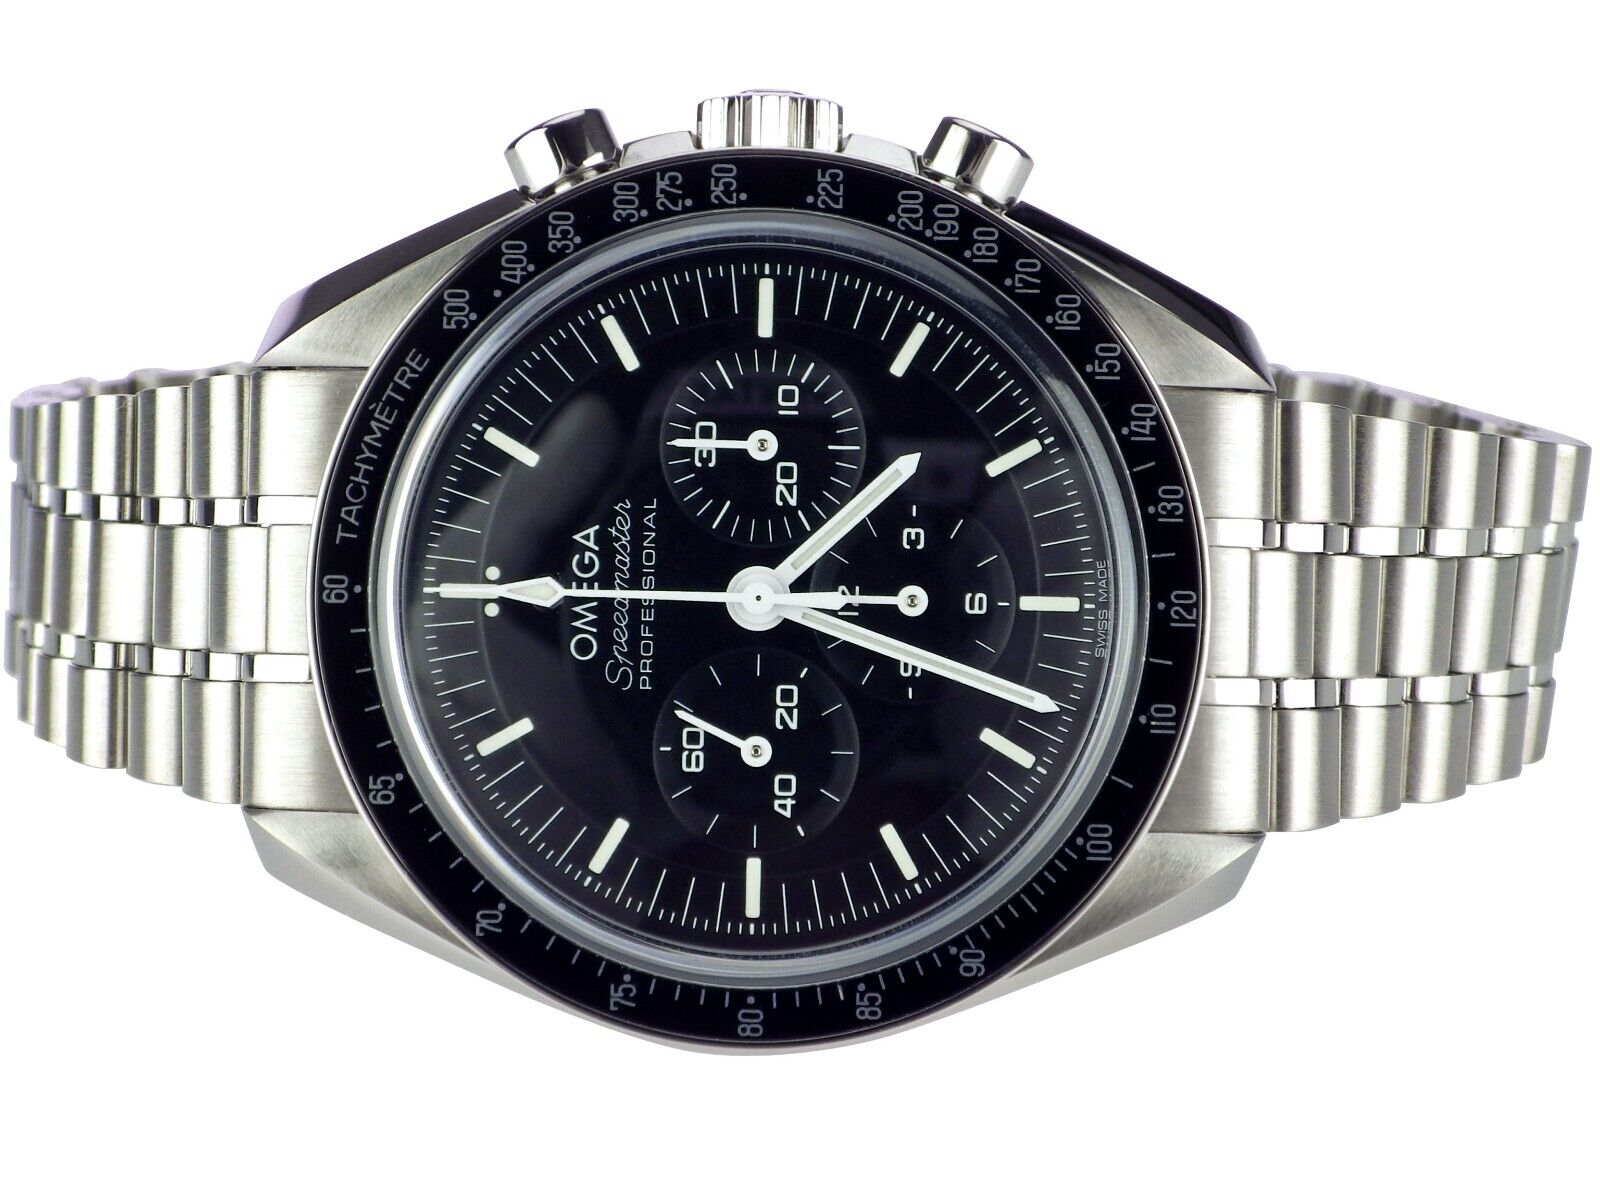 Omega Speedmaster Professional Moonwatch Co-Axial Master Chronometer!